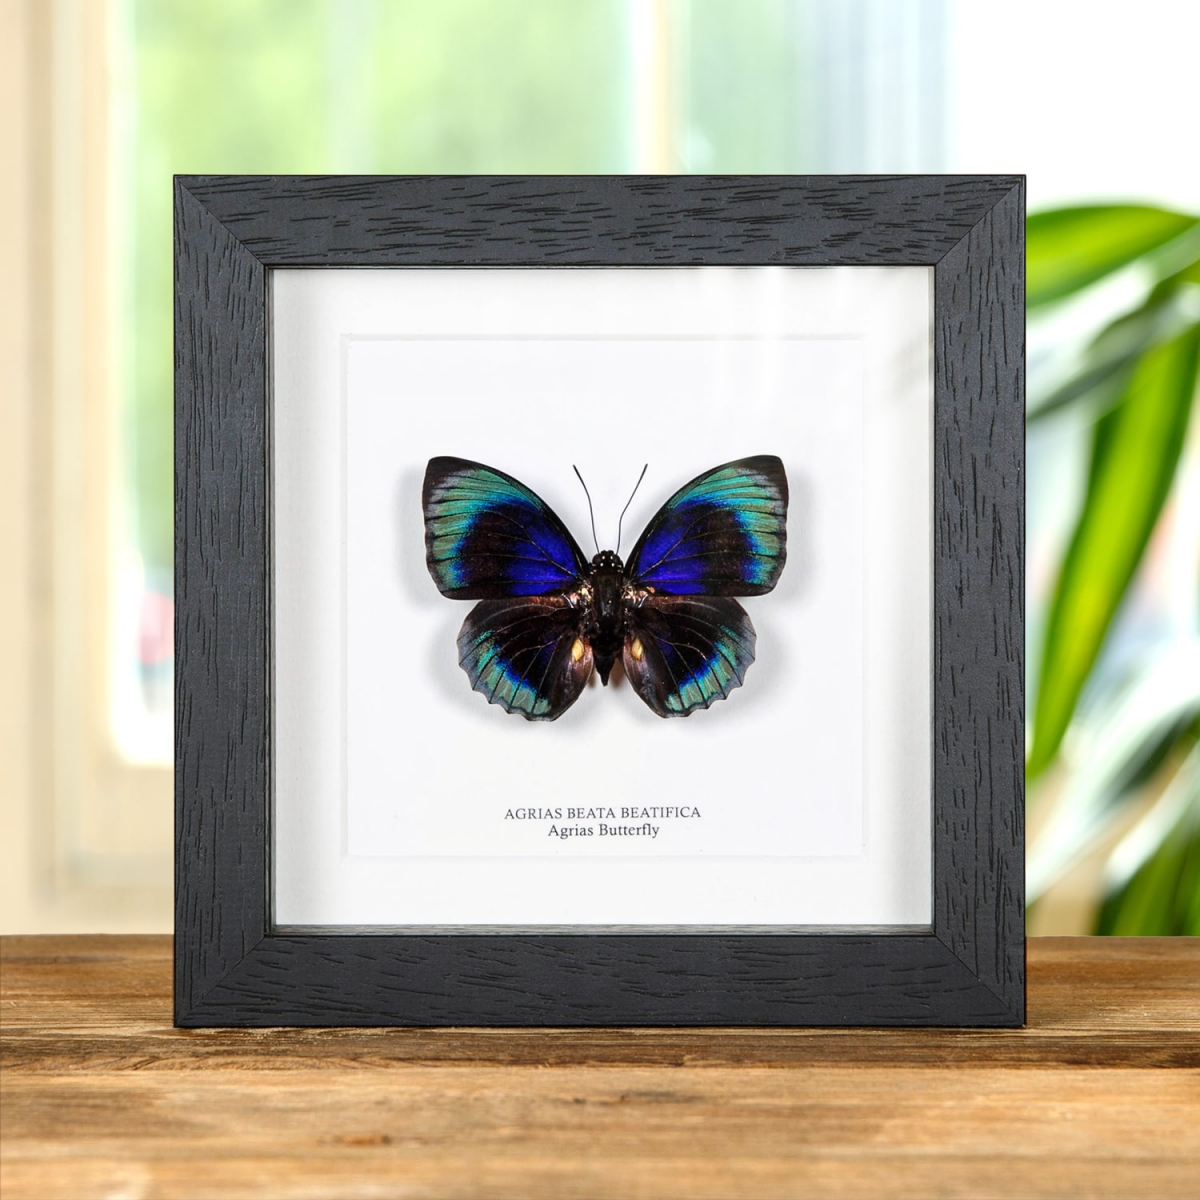 Minibeast Agrias Butterfly In Box Frame (Agrias beata beatifica)